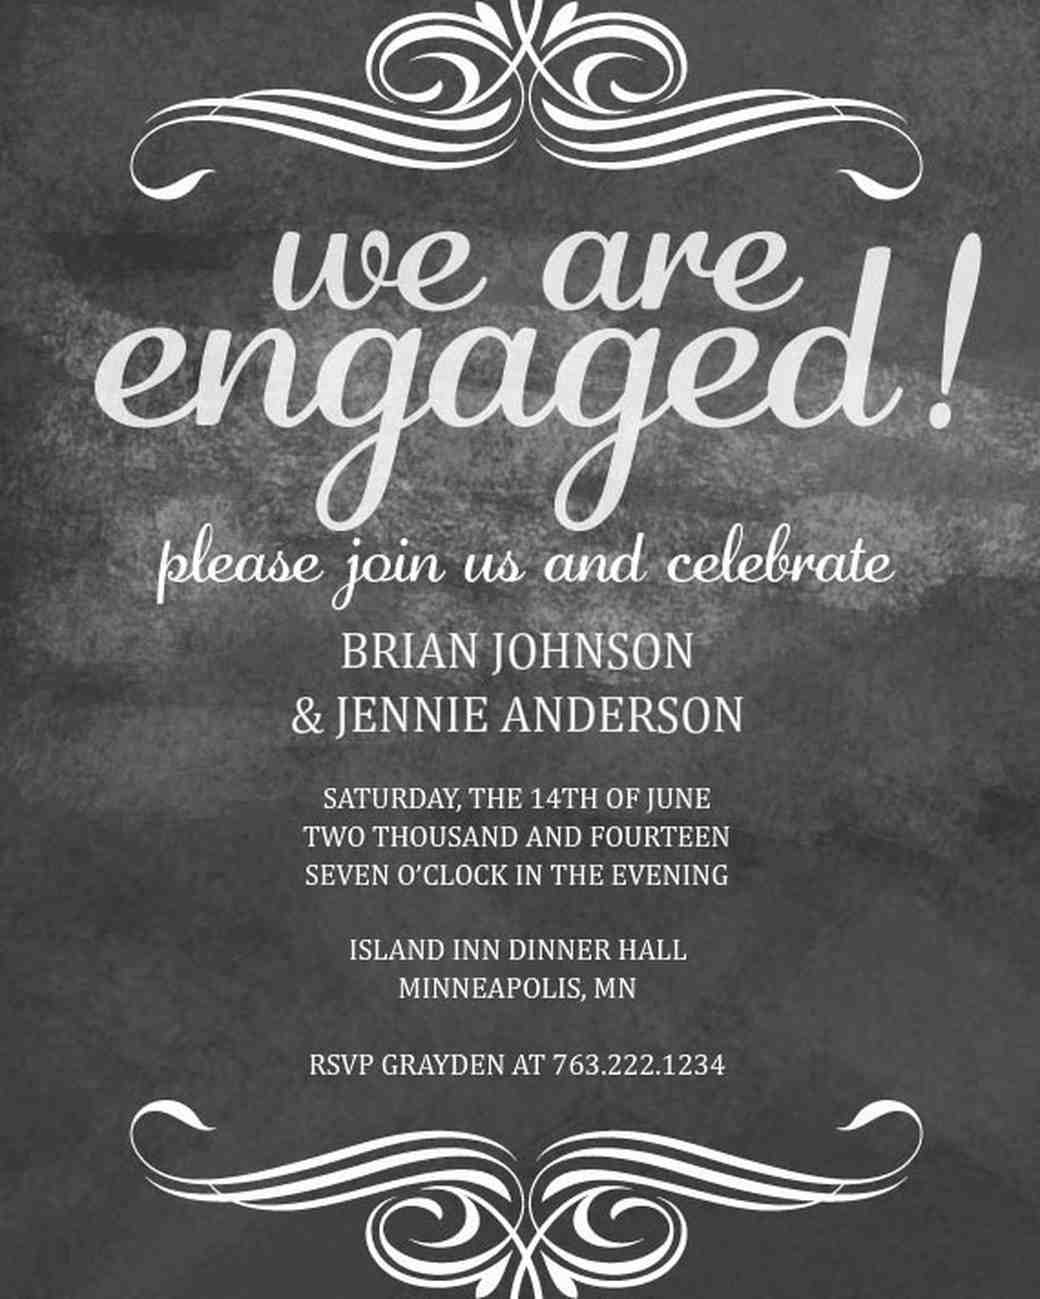 Engagement Party Invitation Ideas
 35 Paperless Engagement Party Invites